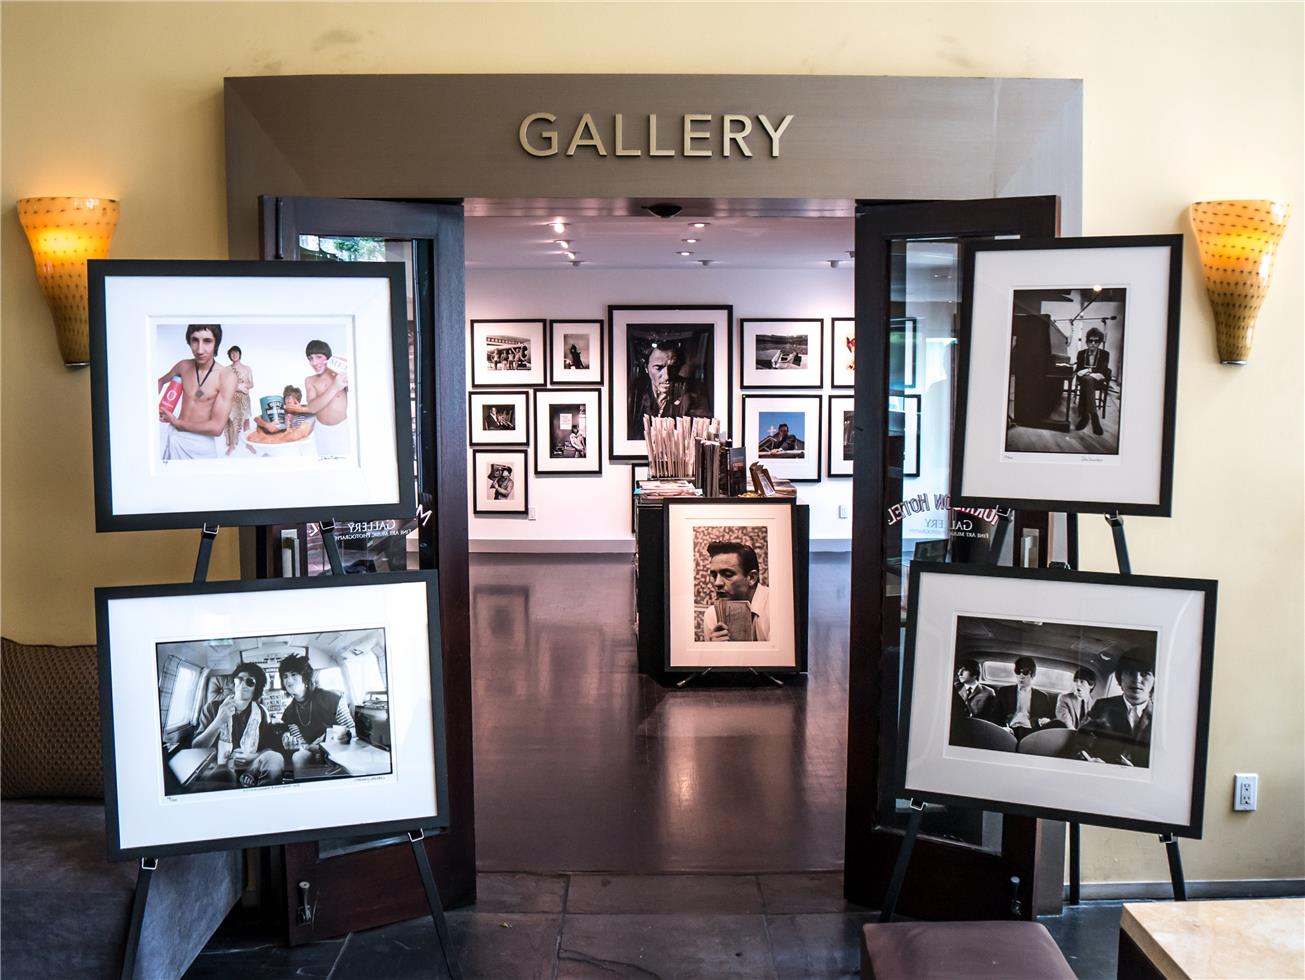 Morrison Hotel Gallery - The Sunset Strip